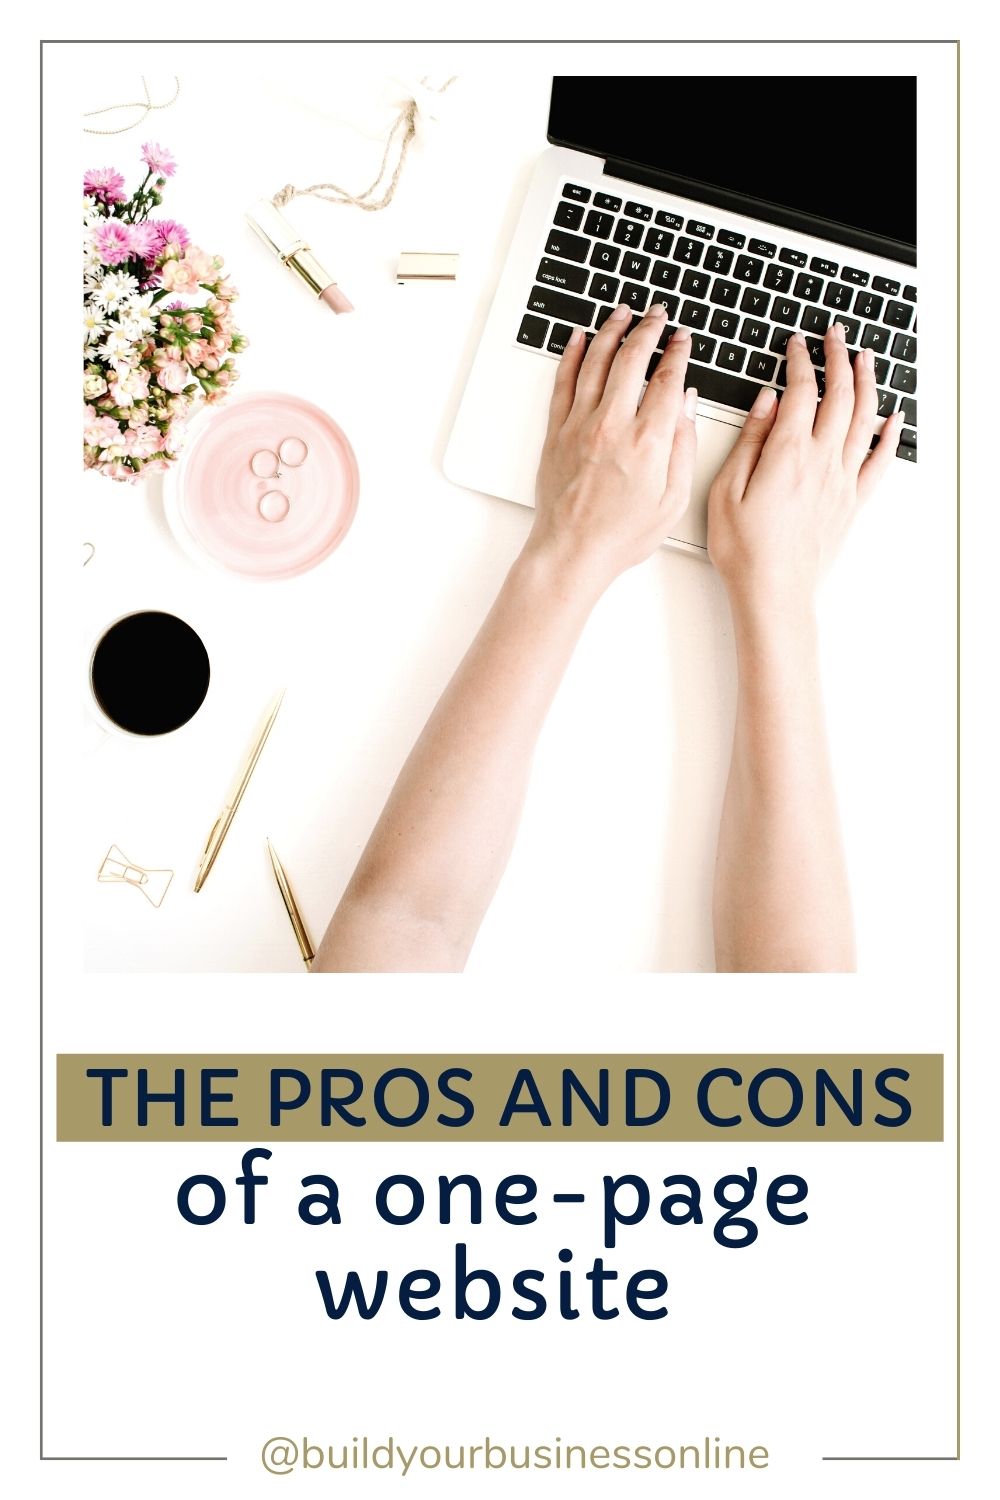 The pros and cons of a one-page website